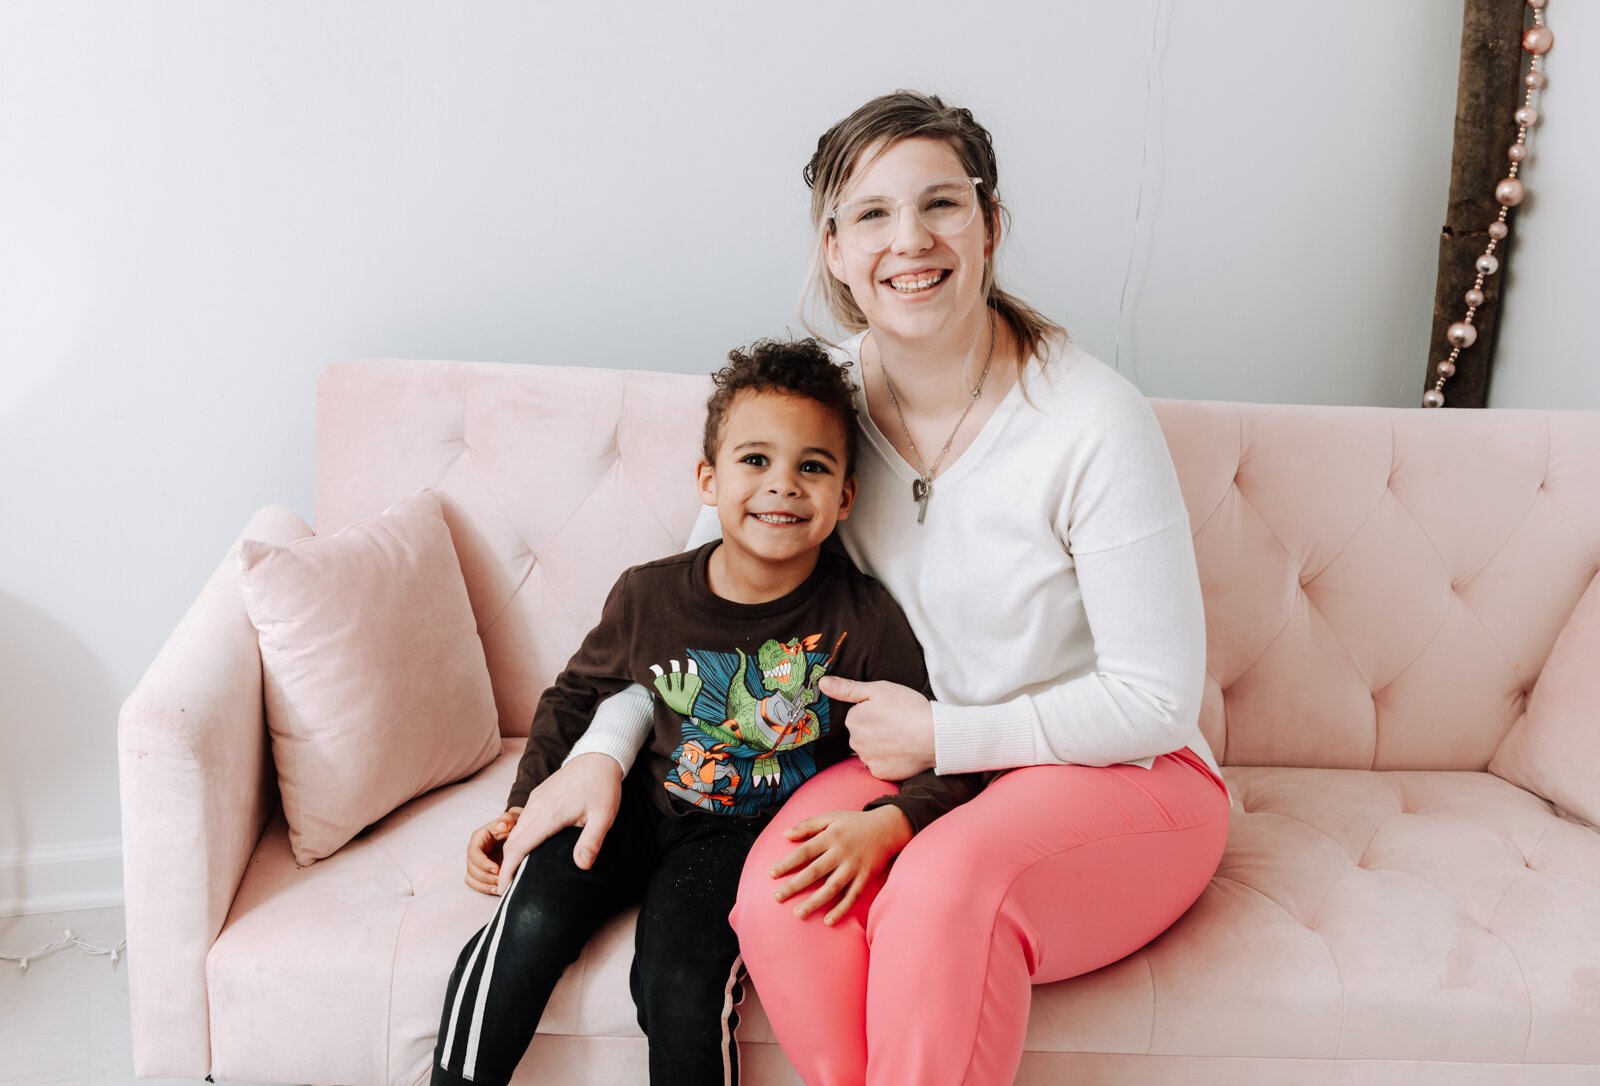 Owner and founder Grayce Holloway with son Zaden, 5, at Icing for Izaac, 243 Airport North Office Park, Fort Wayne, IN 46825. Zaden's identical twin was Izaac, which the shop is named after.